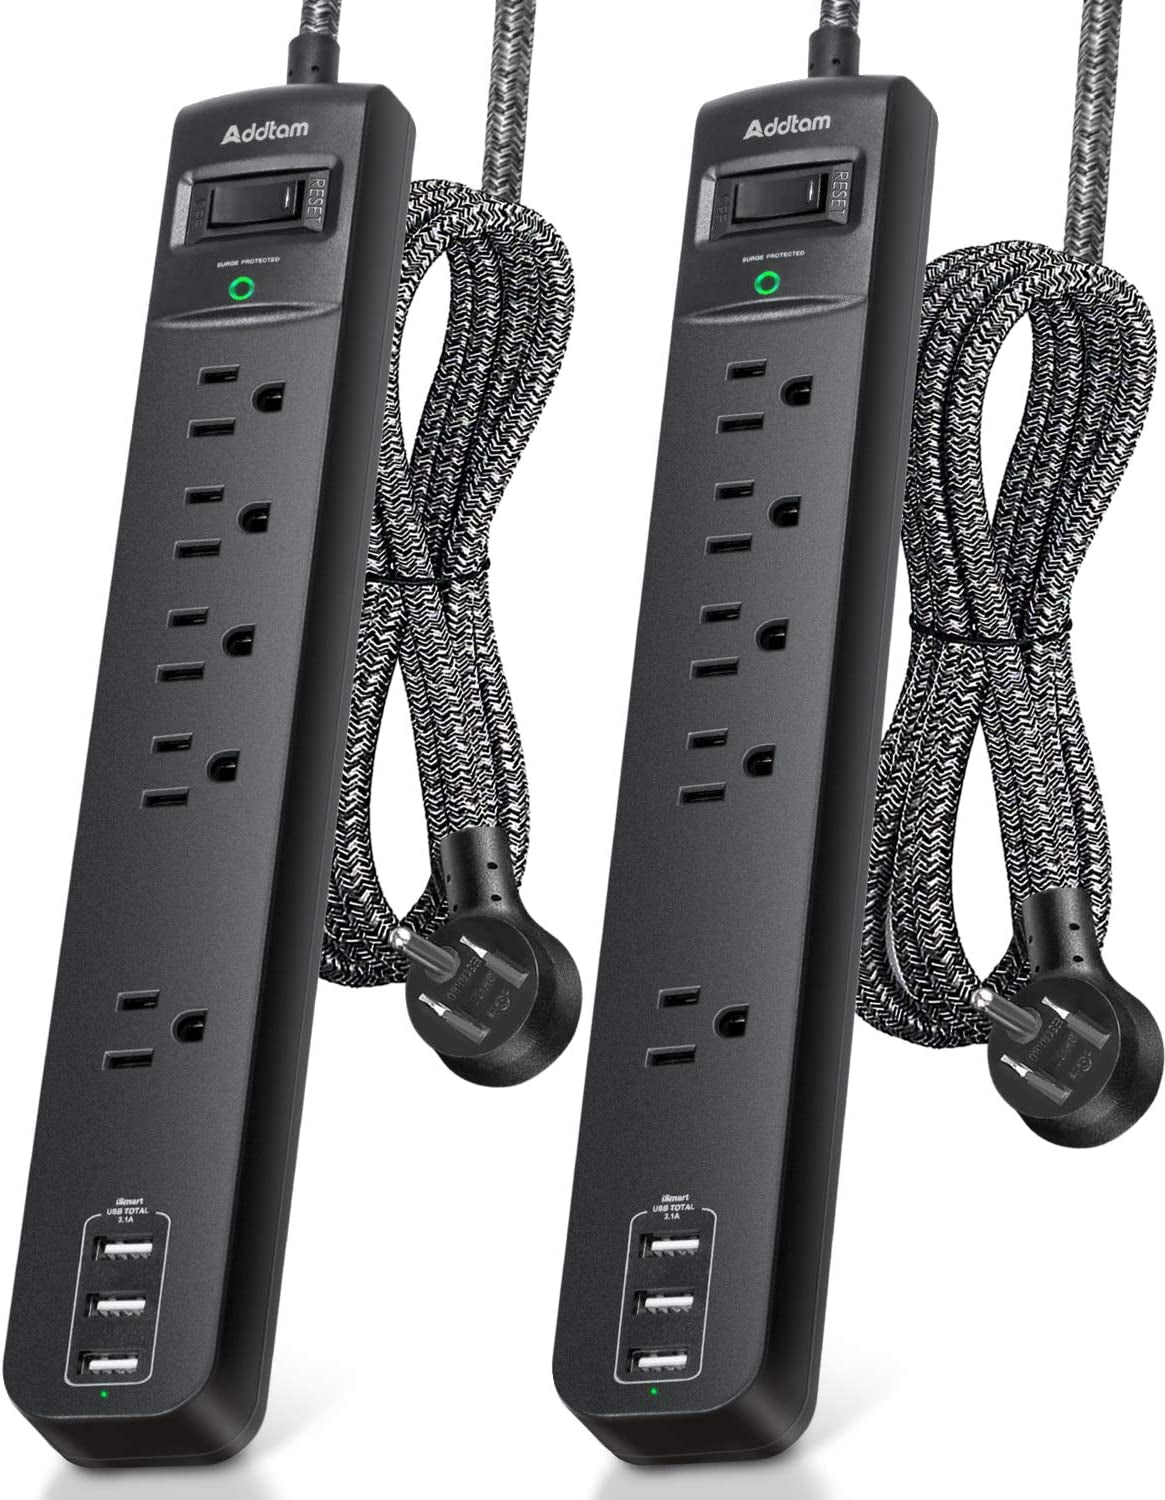 2 Pack Power Strip Surge Protector - 5 Widely Spaced Outlets 3 USB Charging Ports, 1875W/15A with 6Ft Braided Extension Cord, Flat Plug, Overload Surge Protection, Wall Mount for Home Office